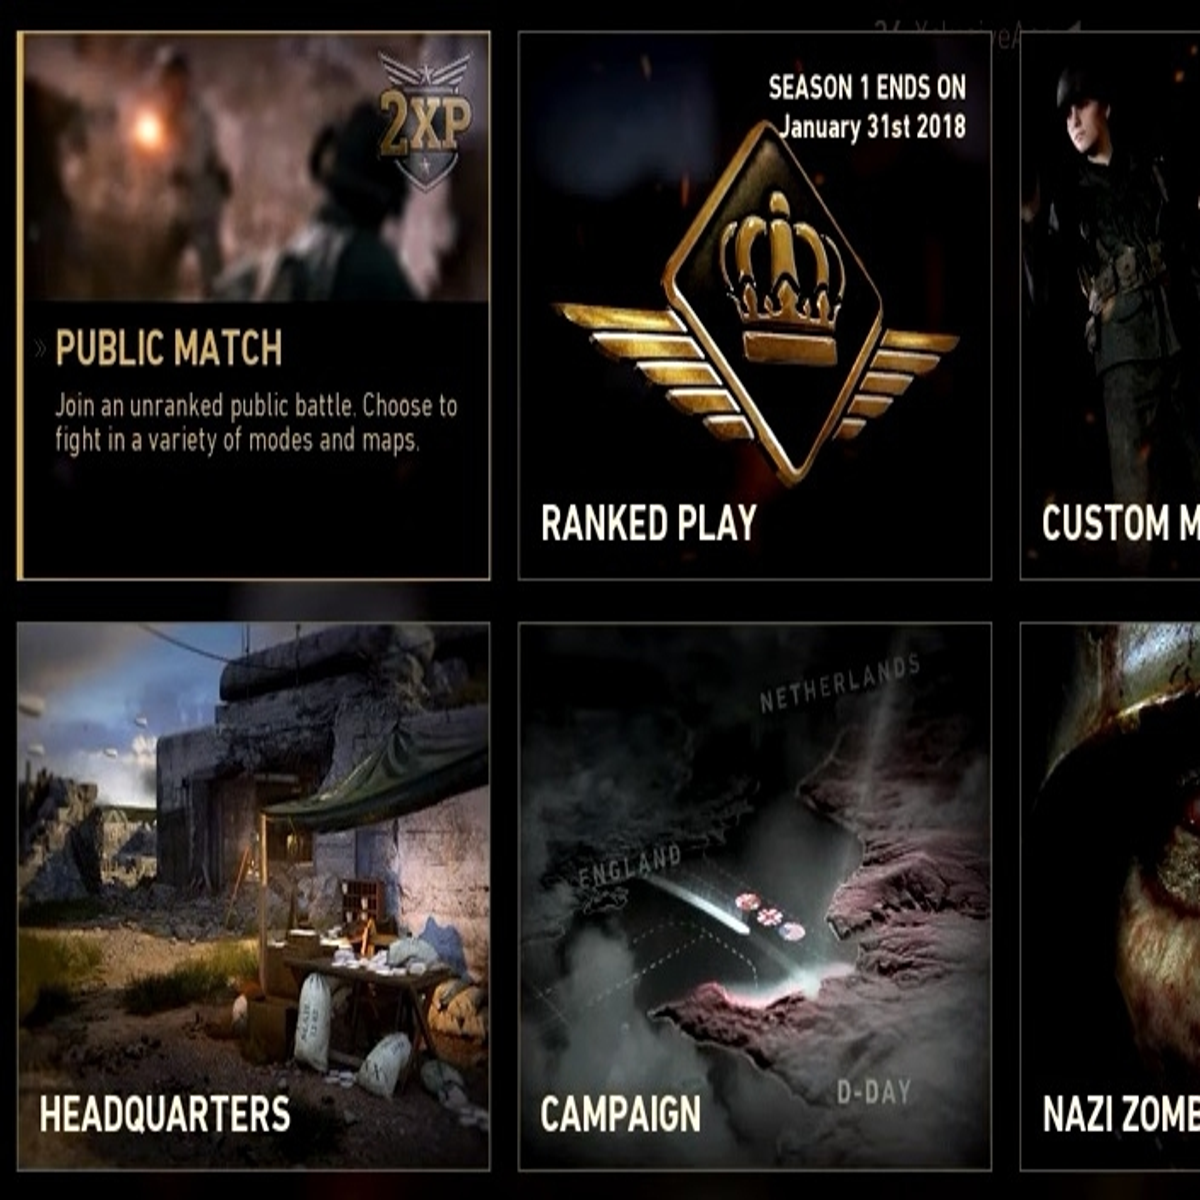 Call Of Duty: WWII Update 1.10 Adds 2 New Pistols, Patch Notes Soon [UPDATE]